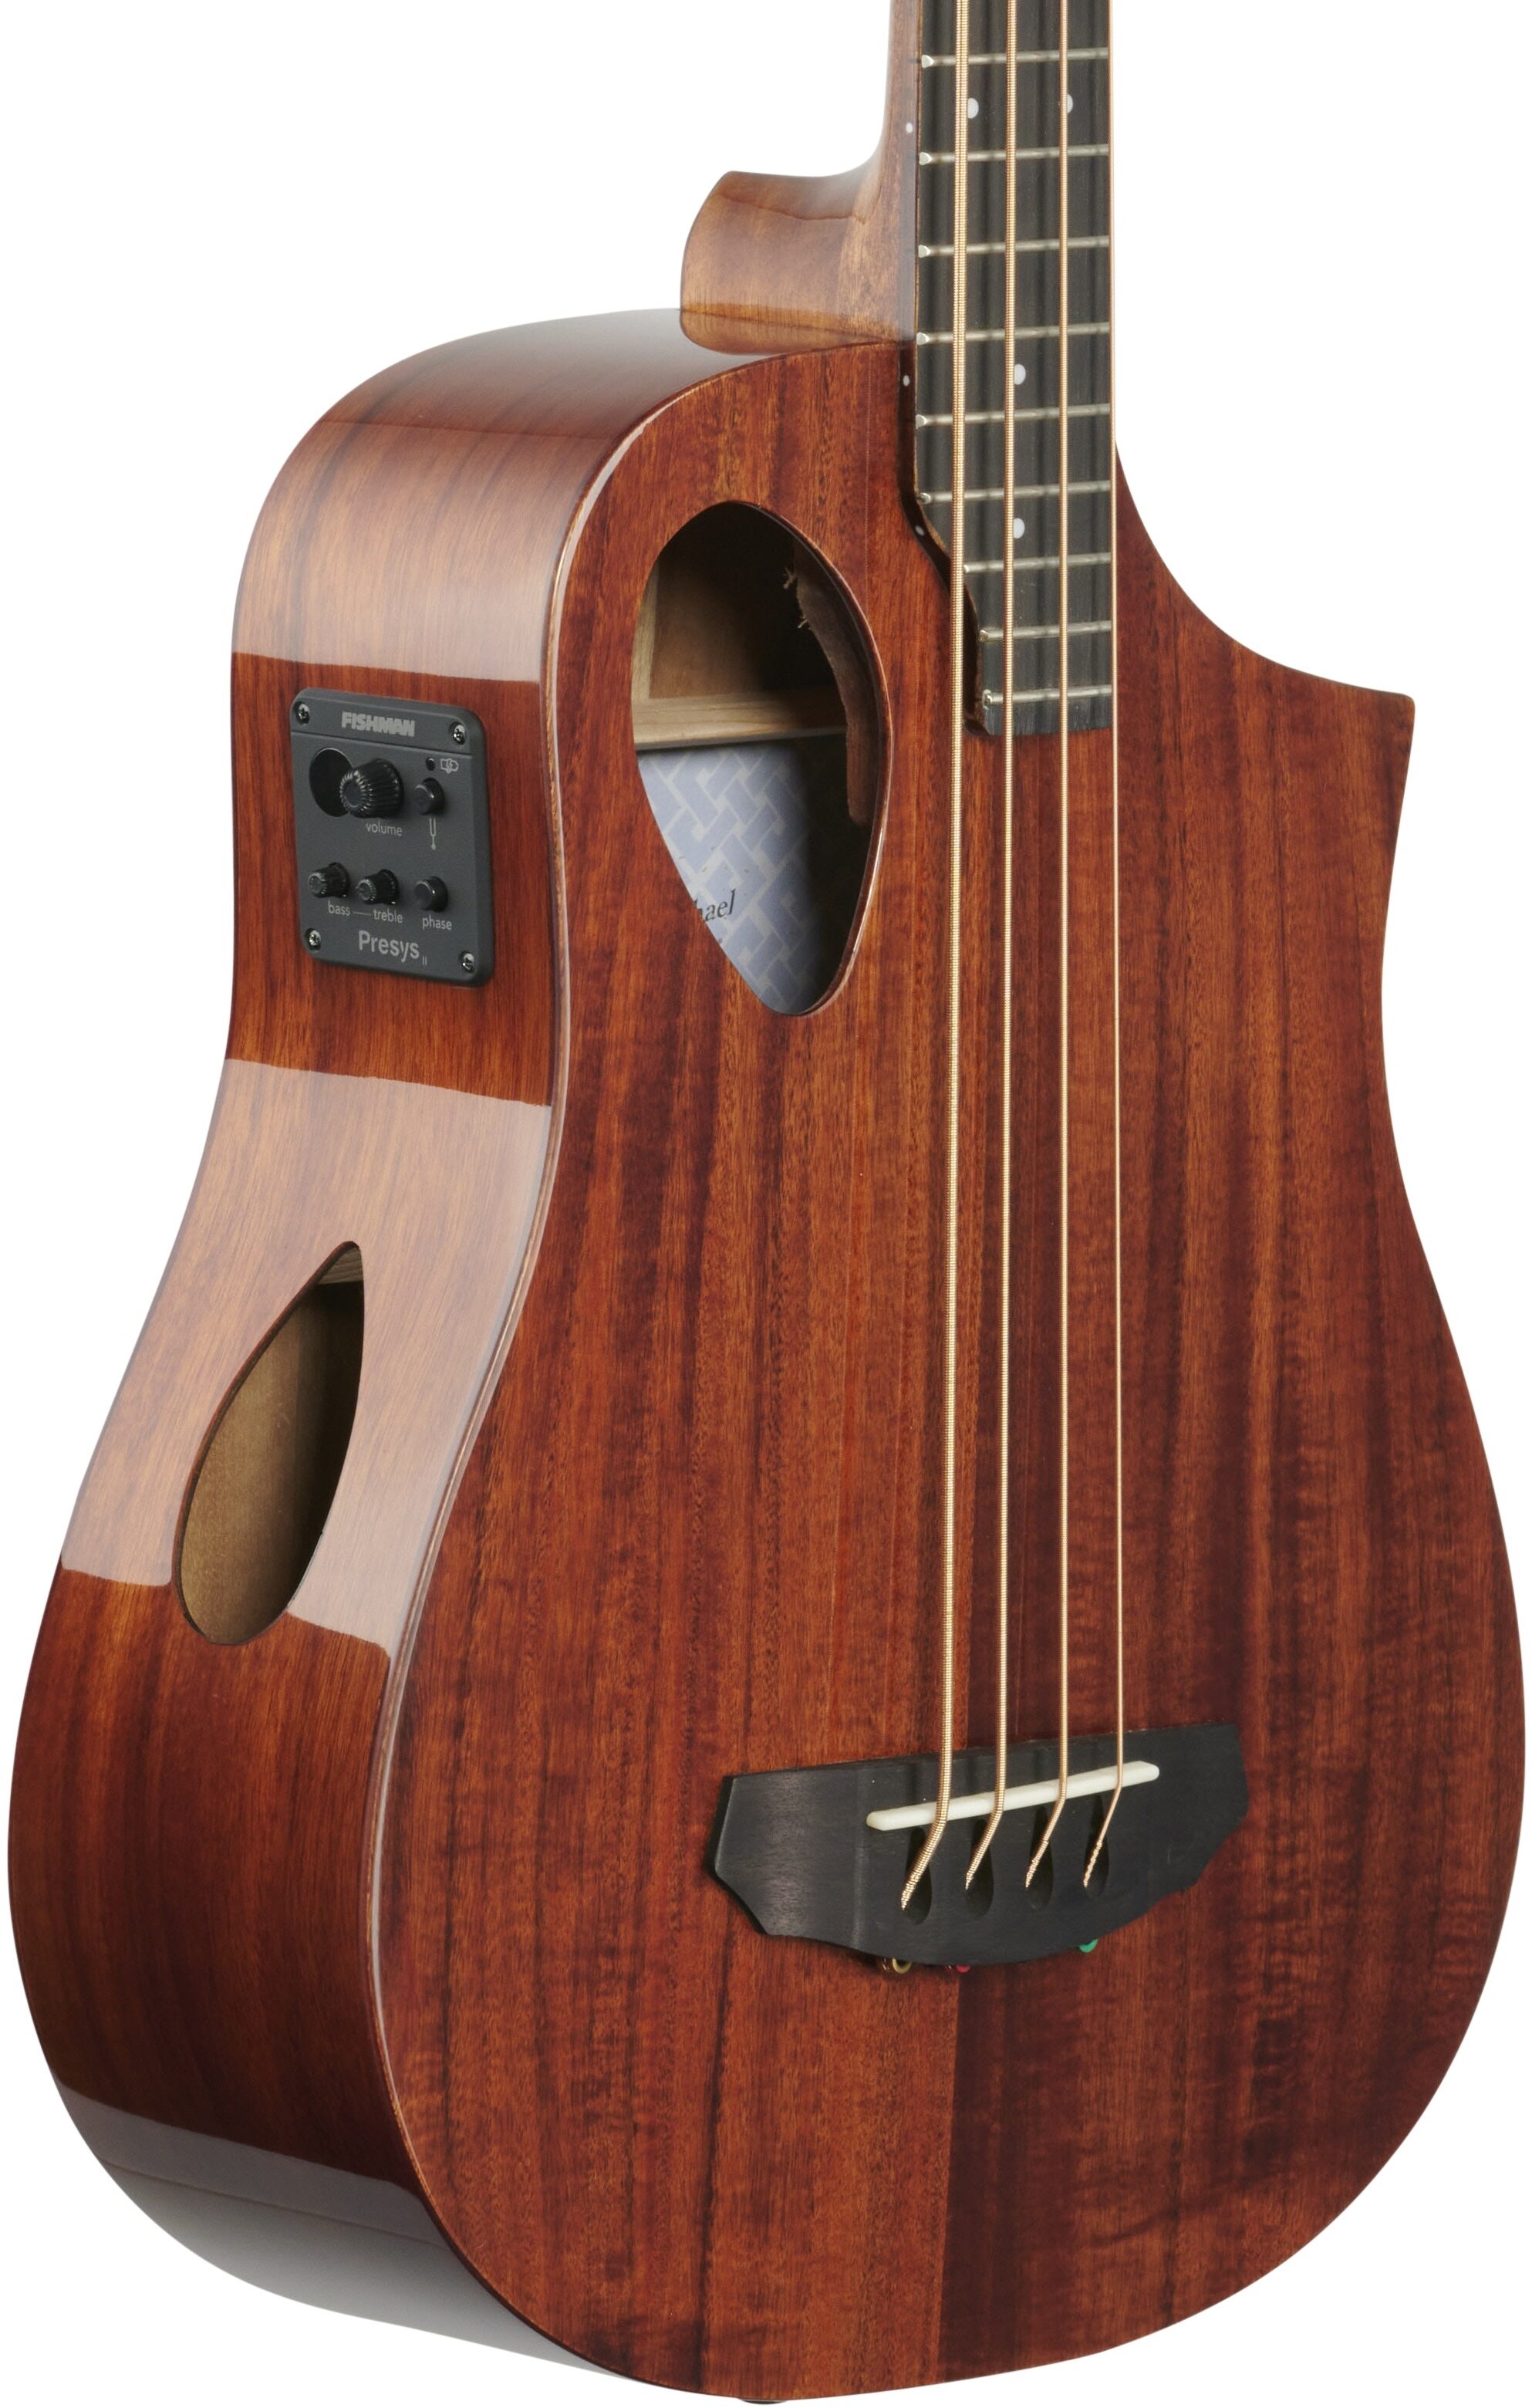 sojourn port acoustic travel bass